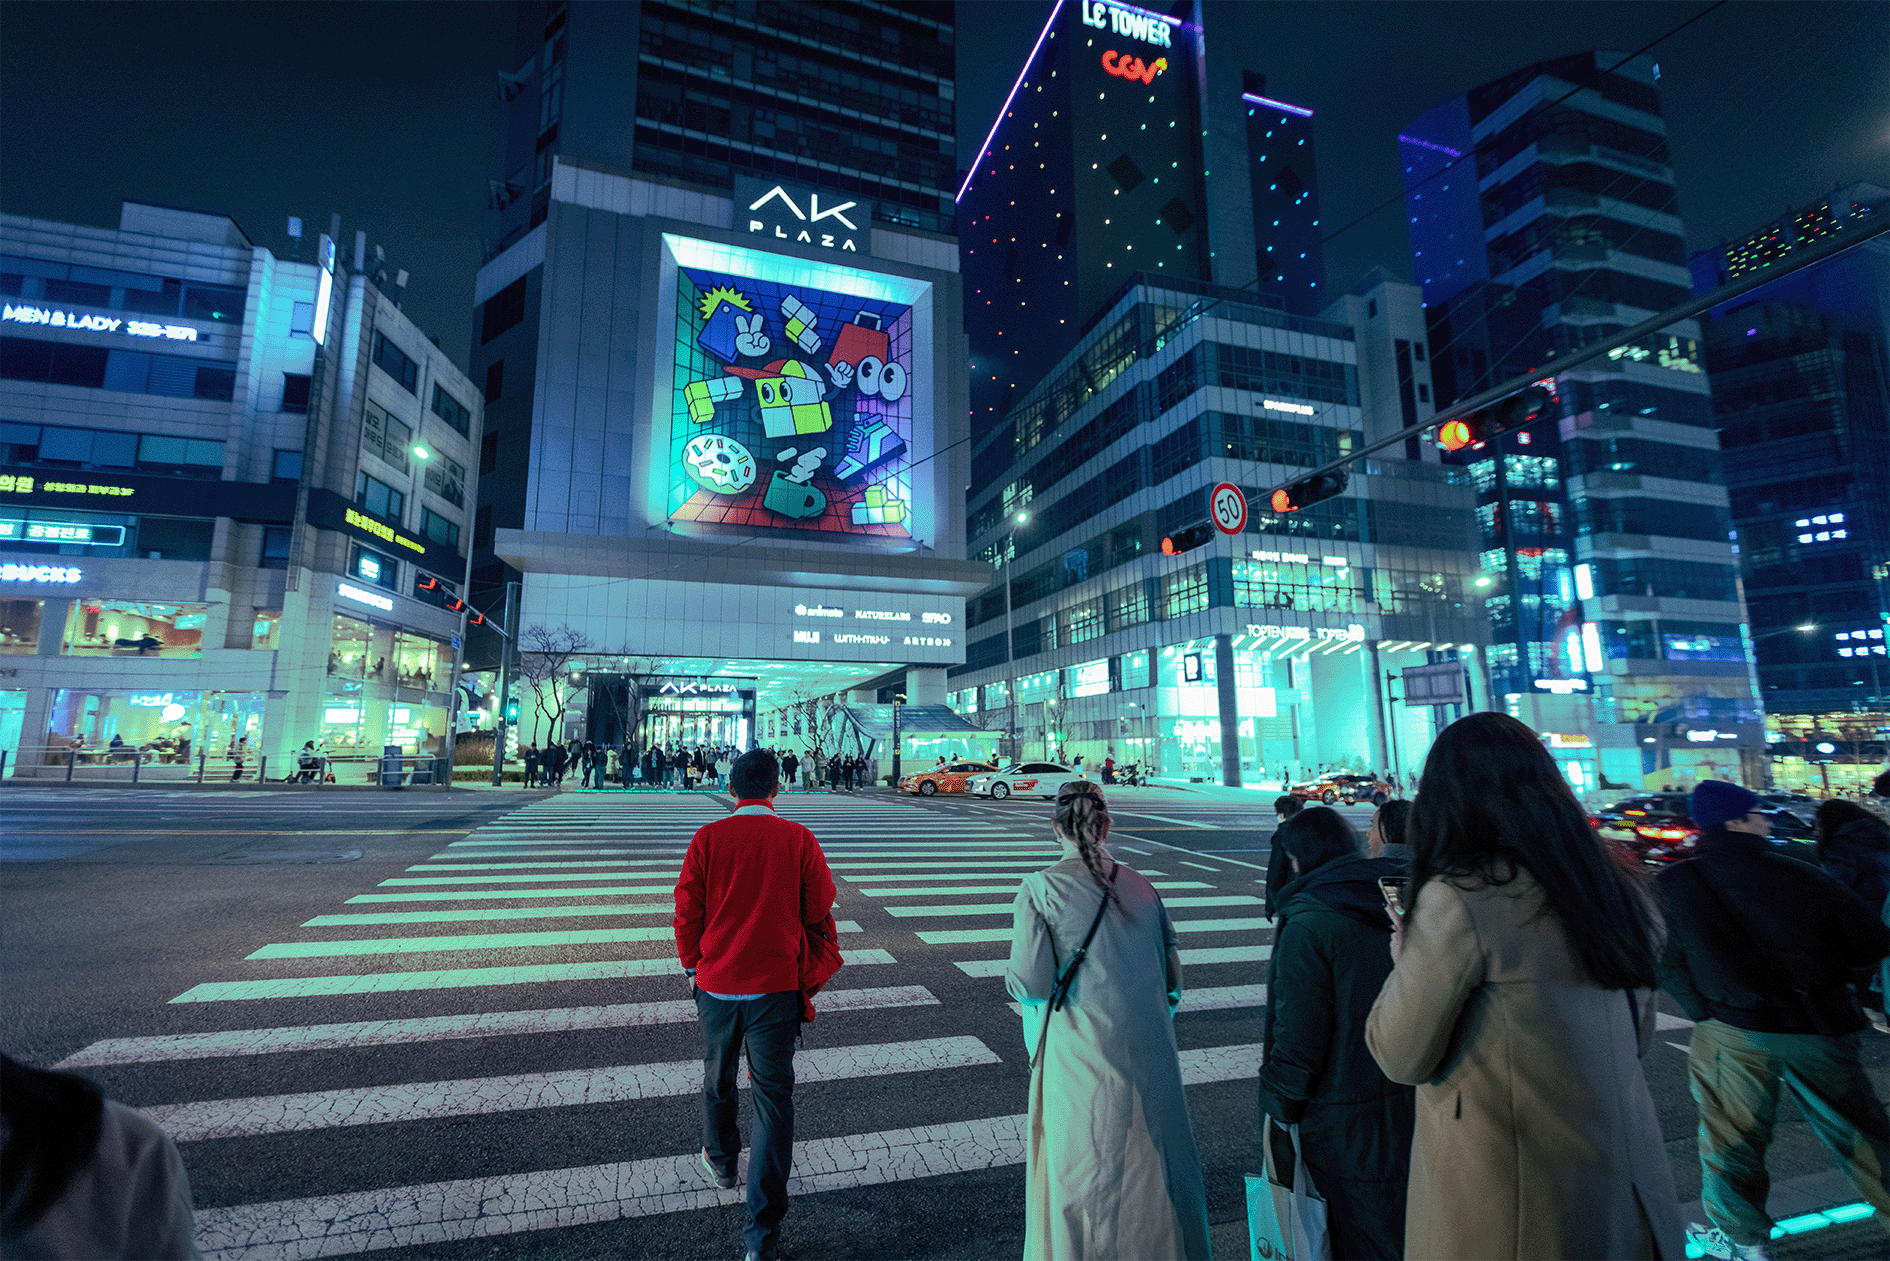 Pedestrians wait to cross at an urban intersection with illuminated billboards at night, no specific persons identified